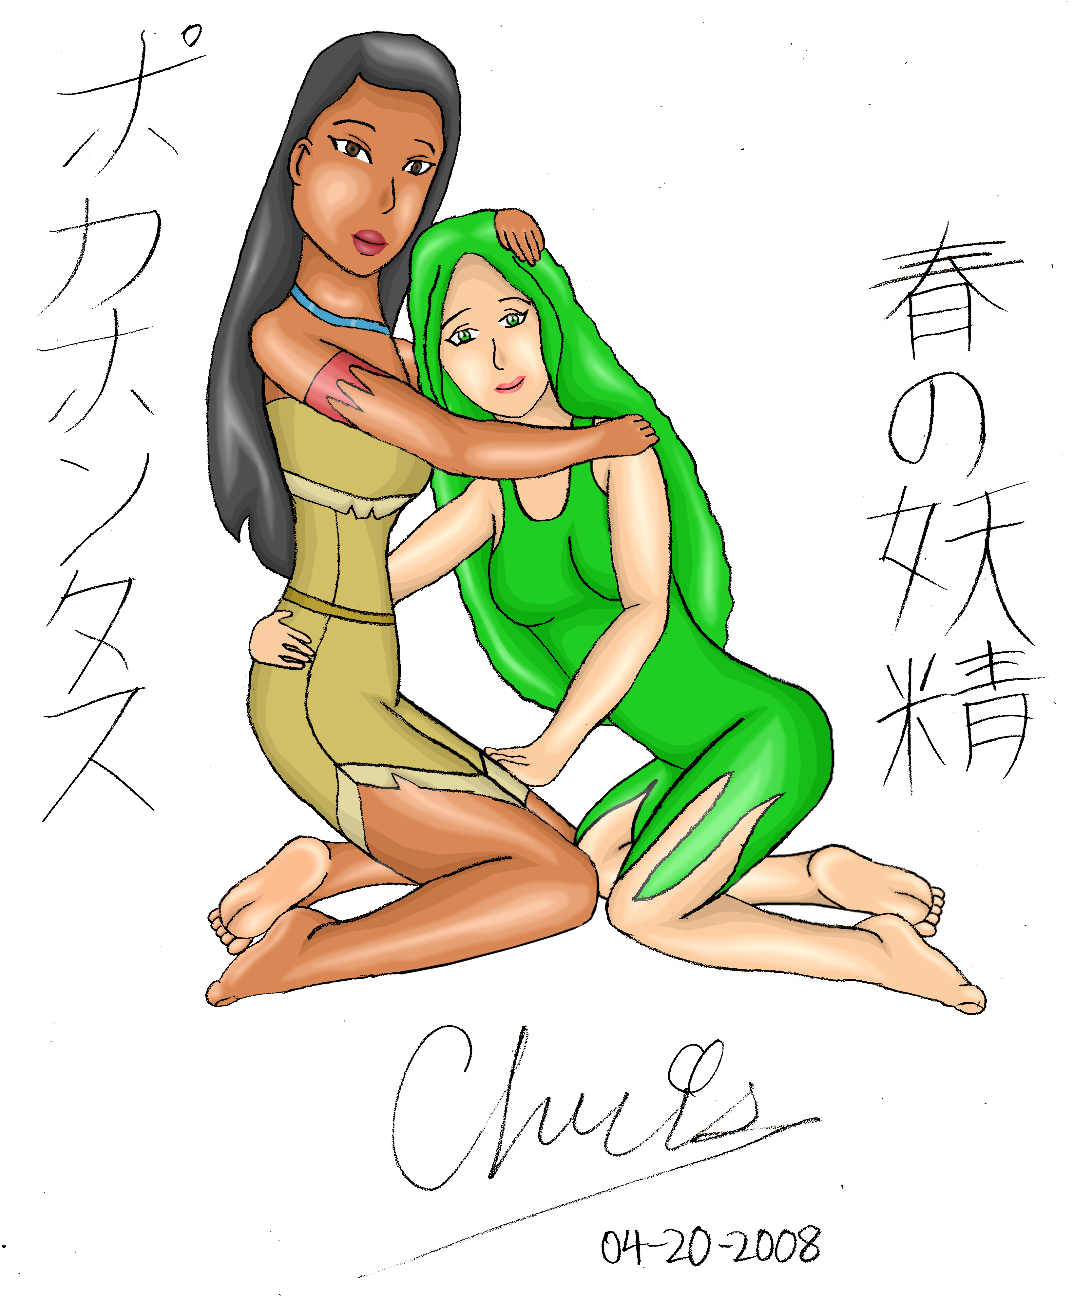 The loving side of Pocahontas by Cclarke